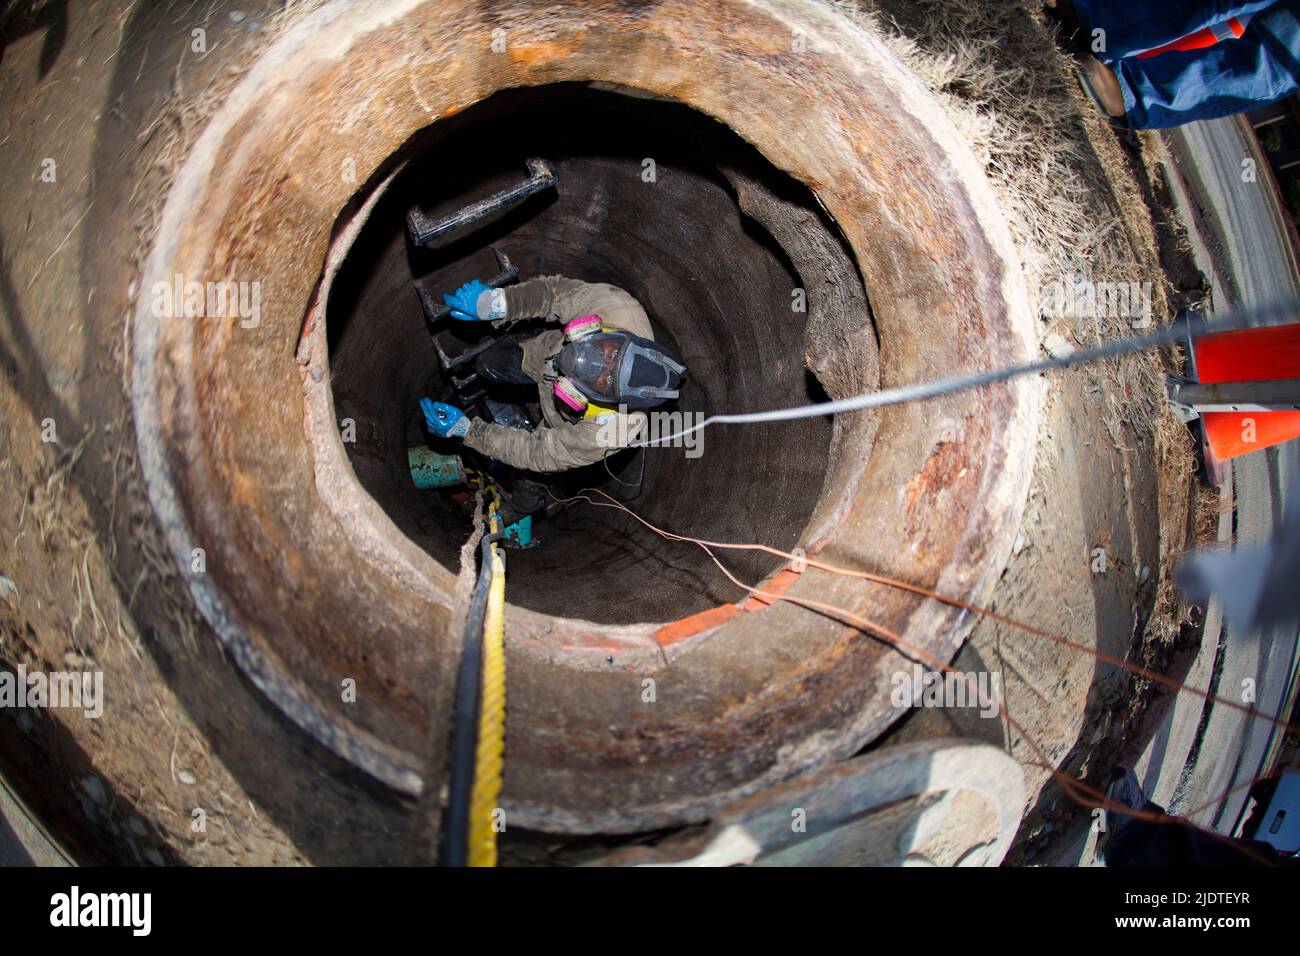 Worker in manhole installing cable for utility company Stock Photo